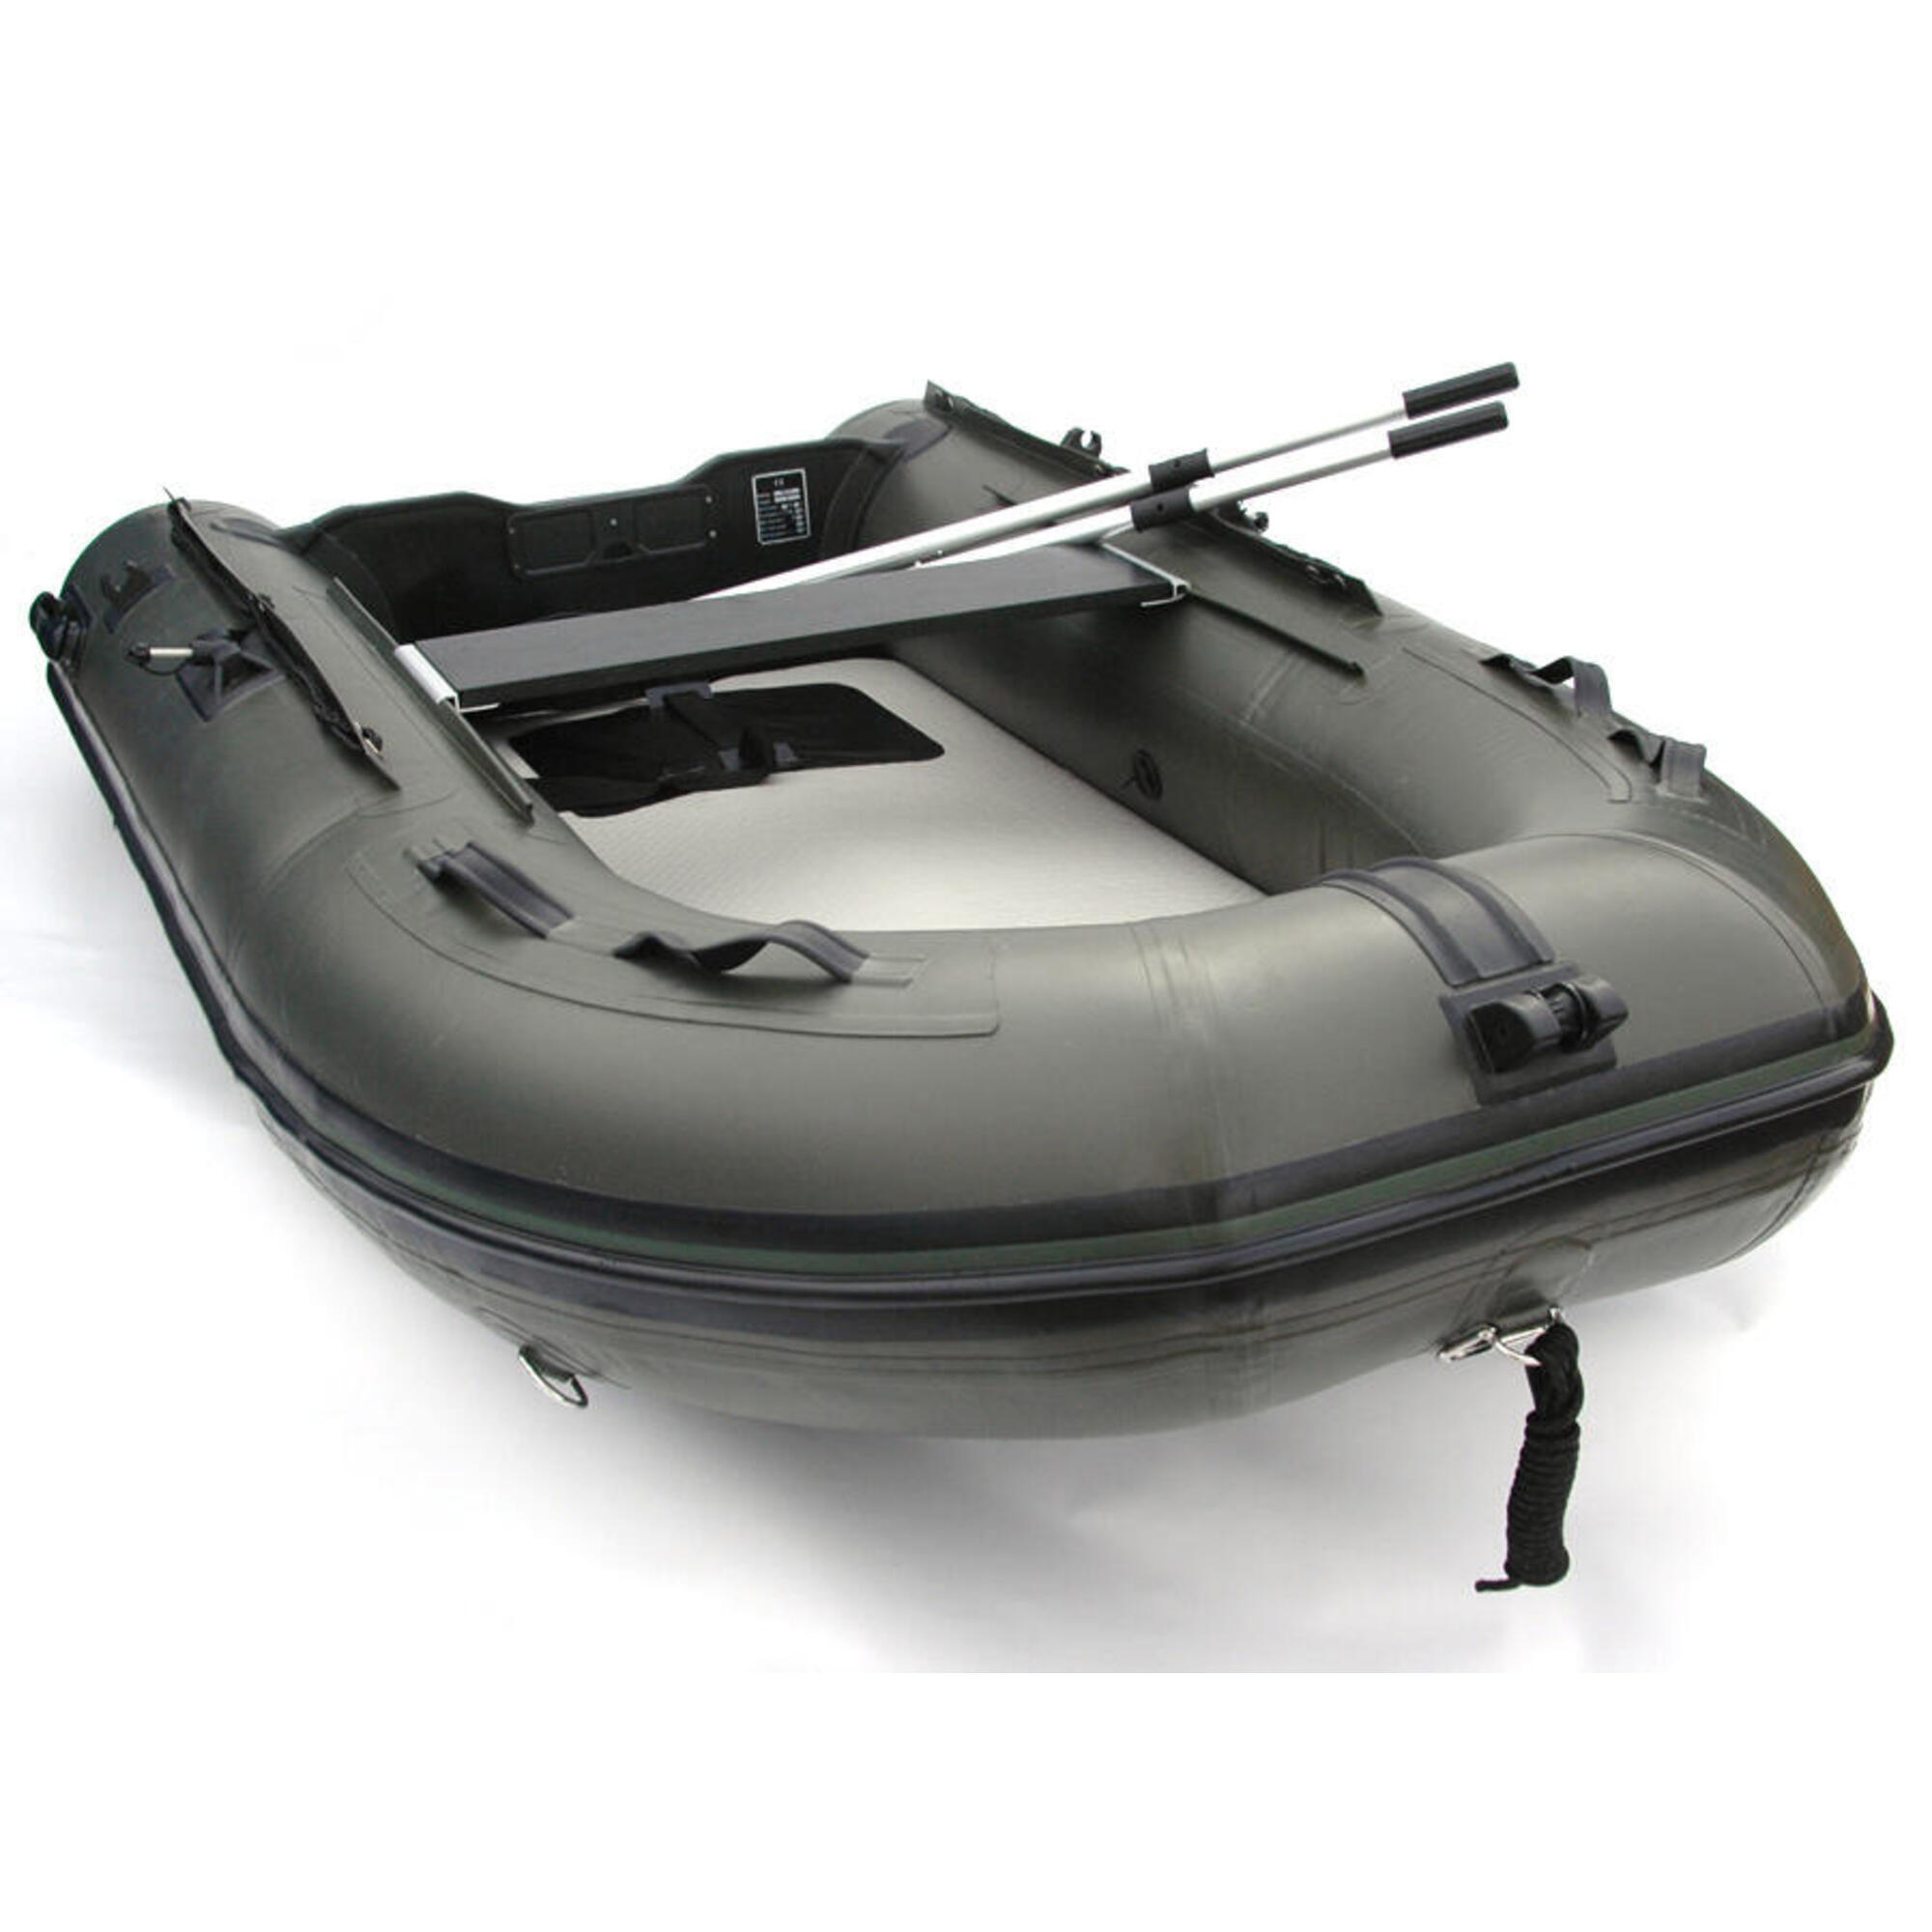 BISON 3.3m Inflatable Fishing Sports Boat Aluminium Deck